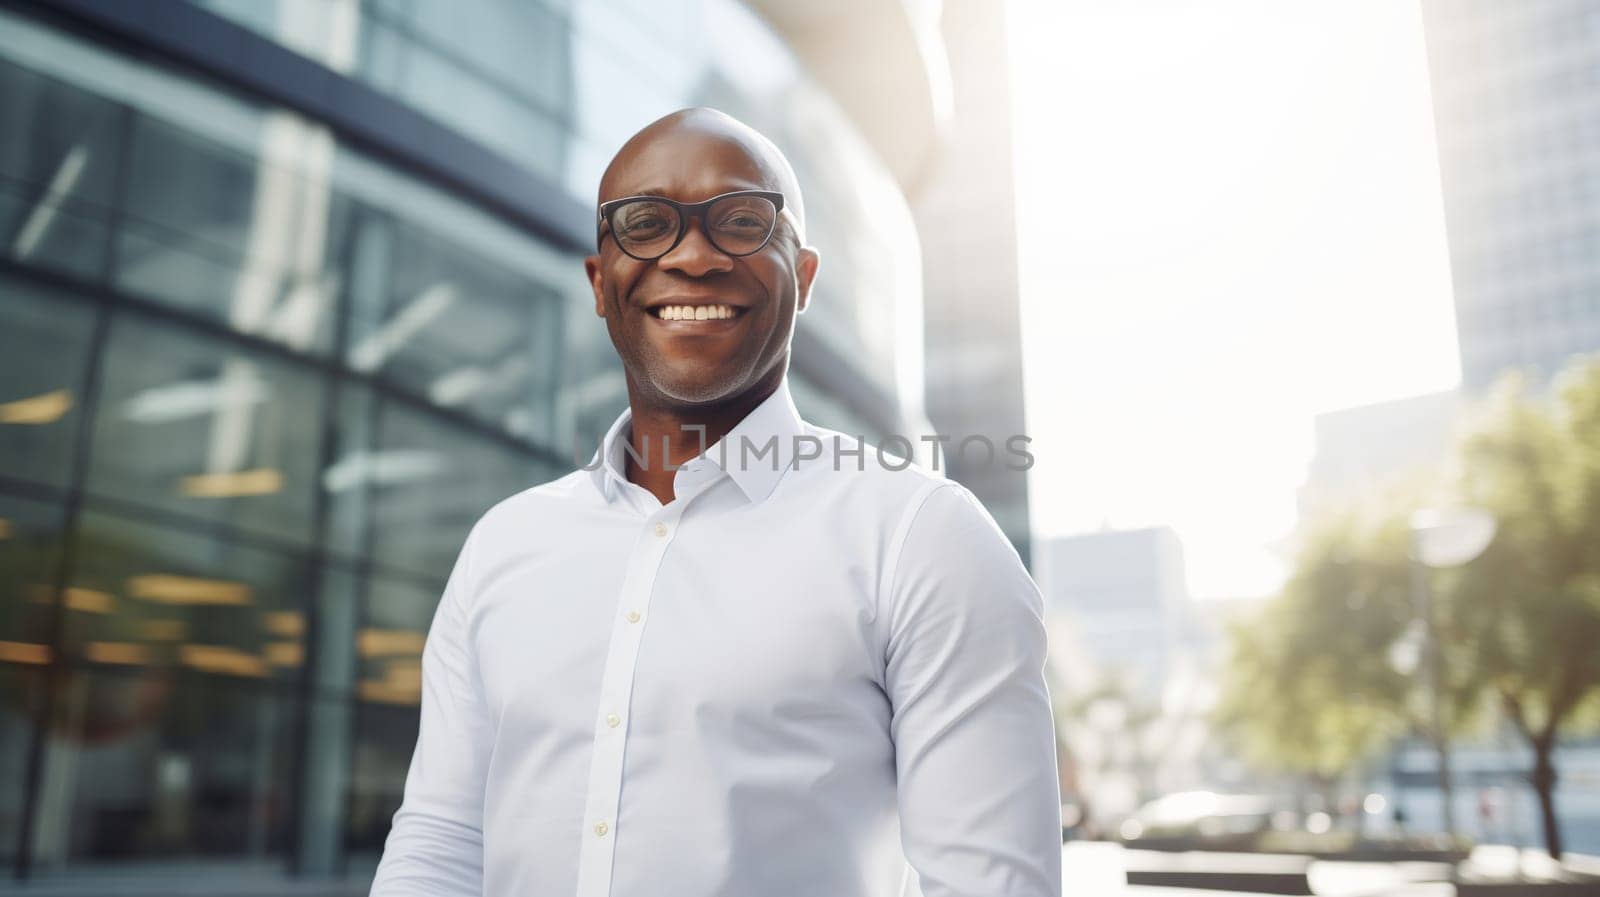 Successful happy smiling mature African businessman standing in the city, wearing white shirt and glasses, looking at camera